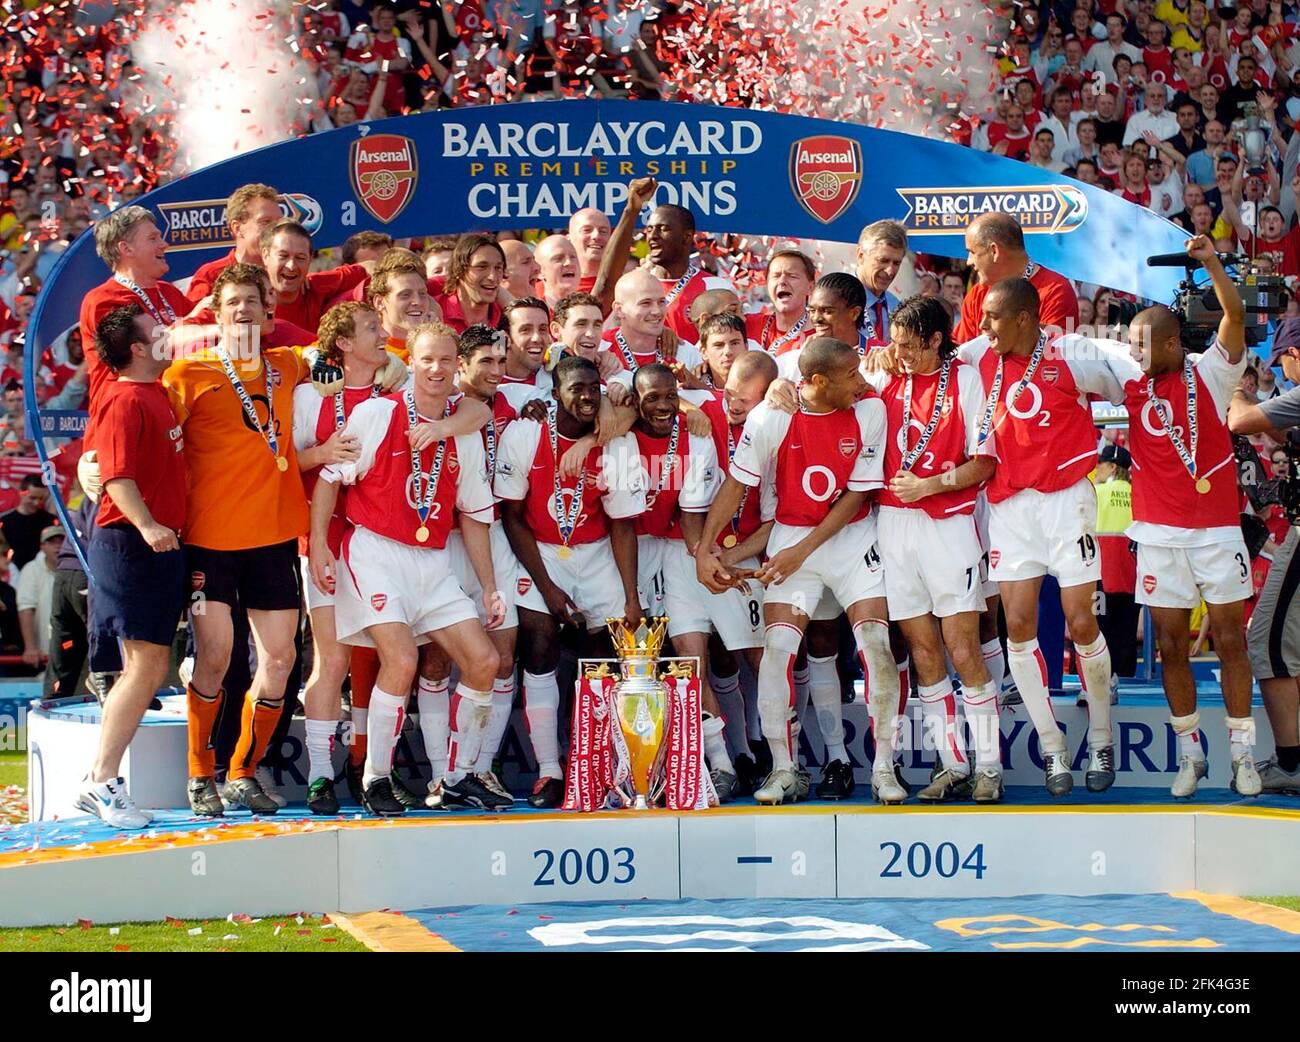 ARSENAL V LEICESTER 15/5/2004 ARSENAL GET THE CHAMPIONSHIP TROPHY PICTURE  DAVID ASHDOWNPREMIER LEAGUE FOOTBALL Stock Photo - Alamy